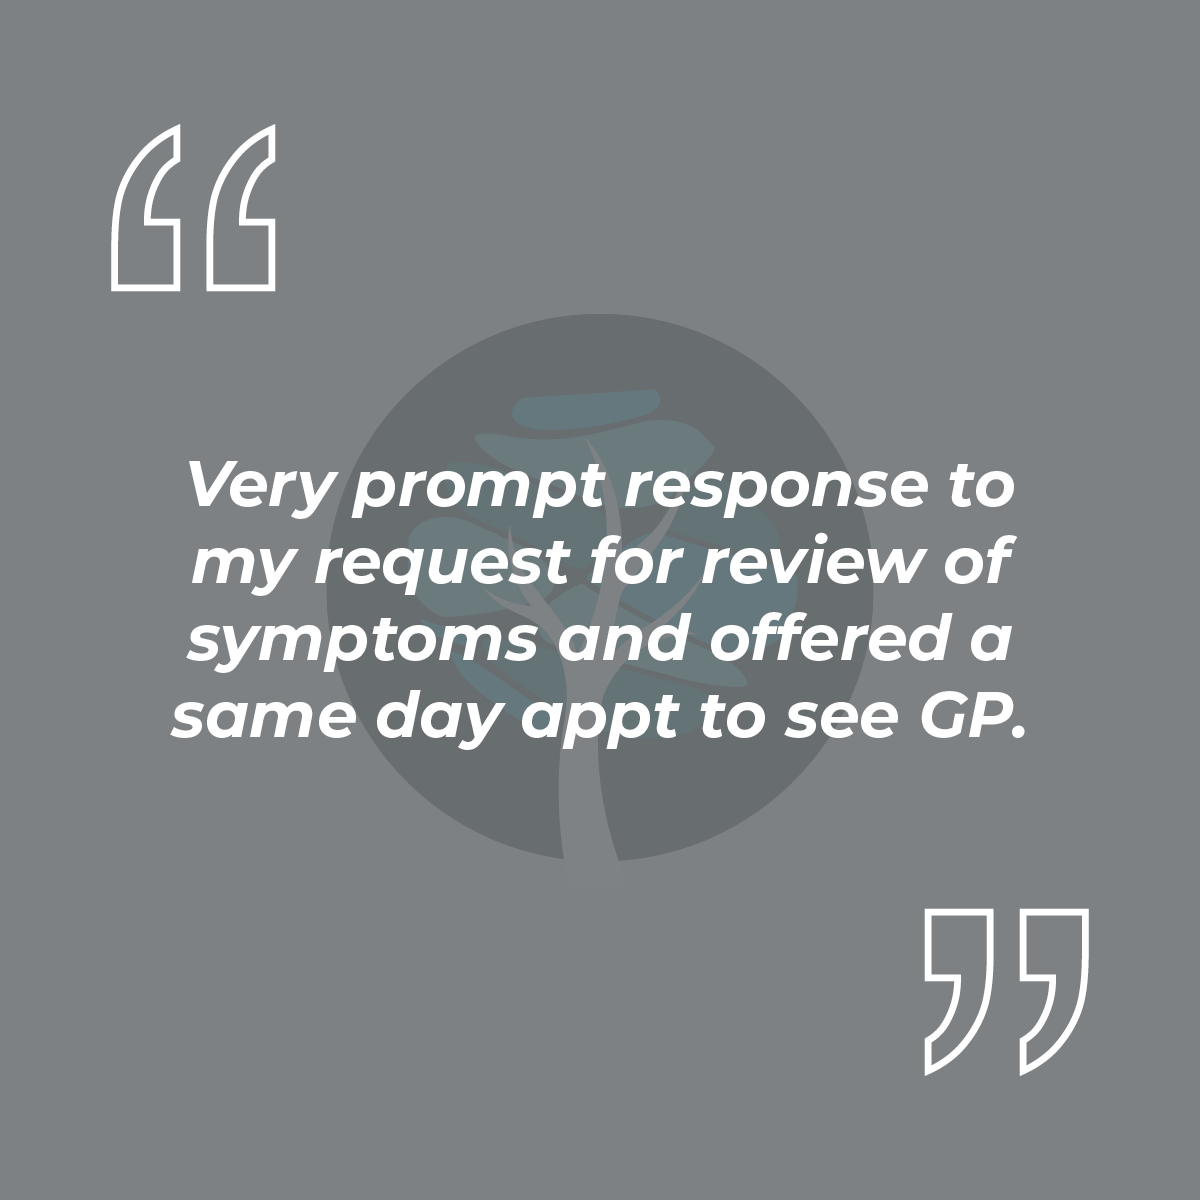 Very prompt response to my request for review of symptoms and offered a same day appt to see GP.